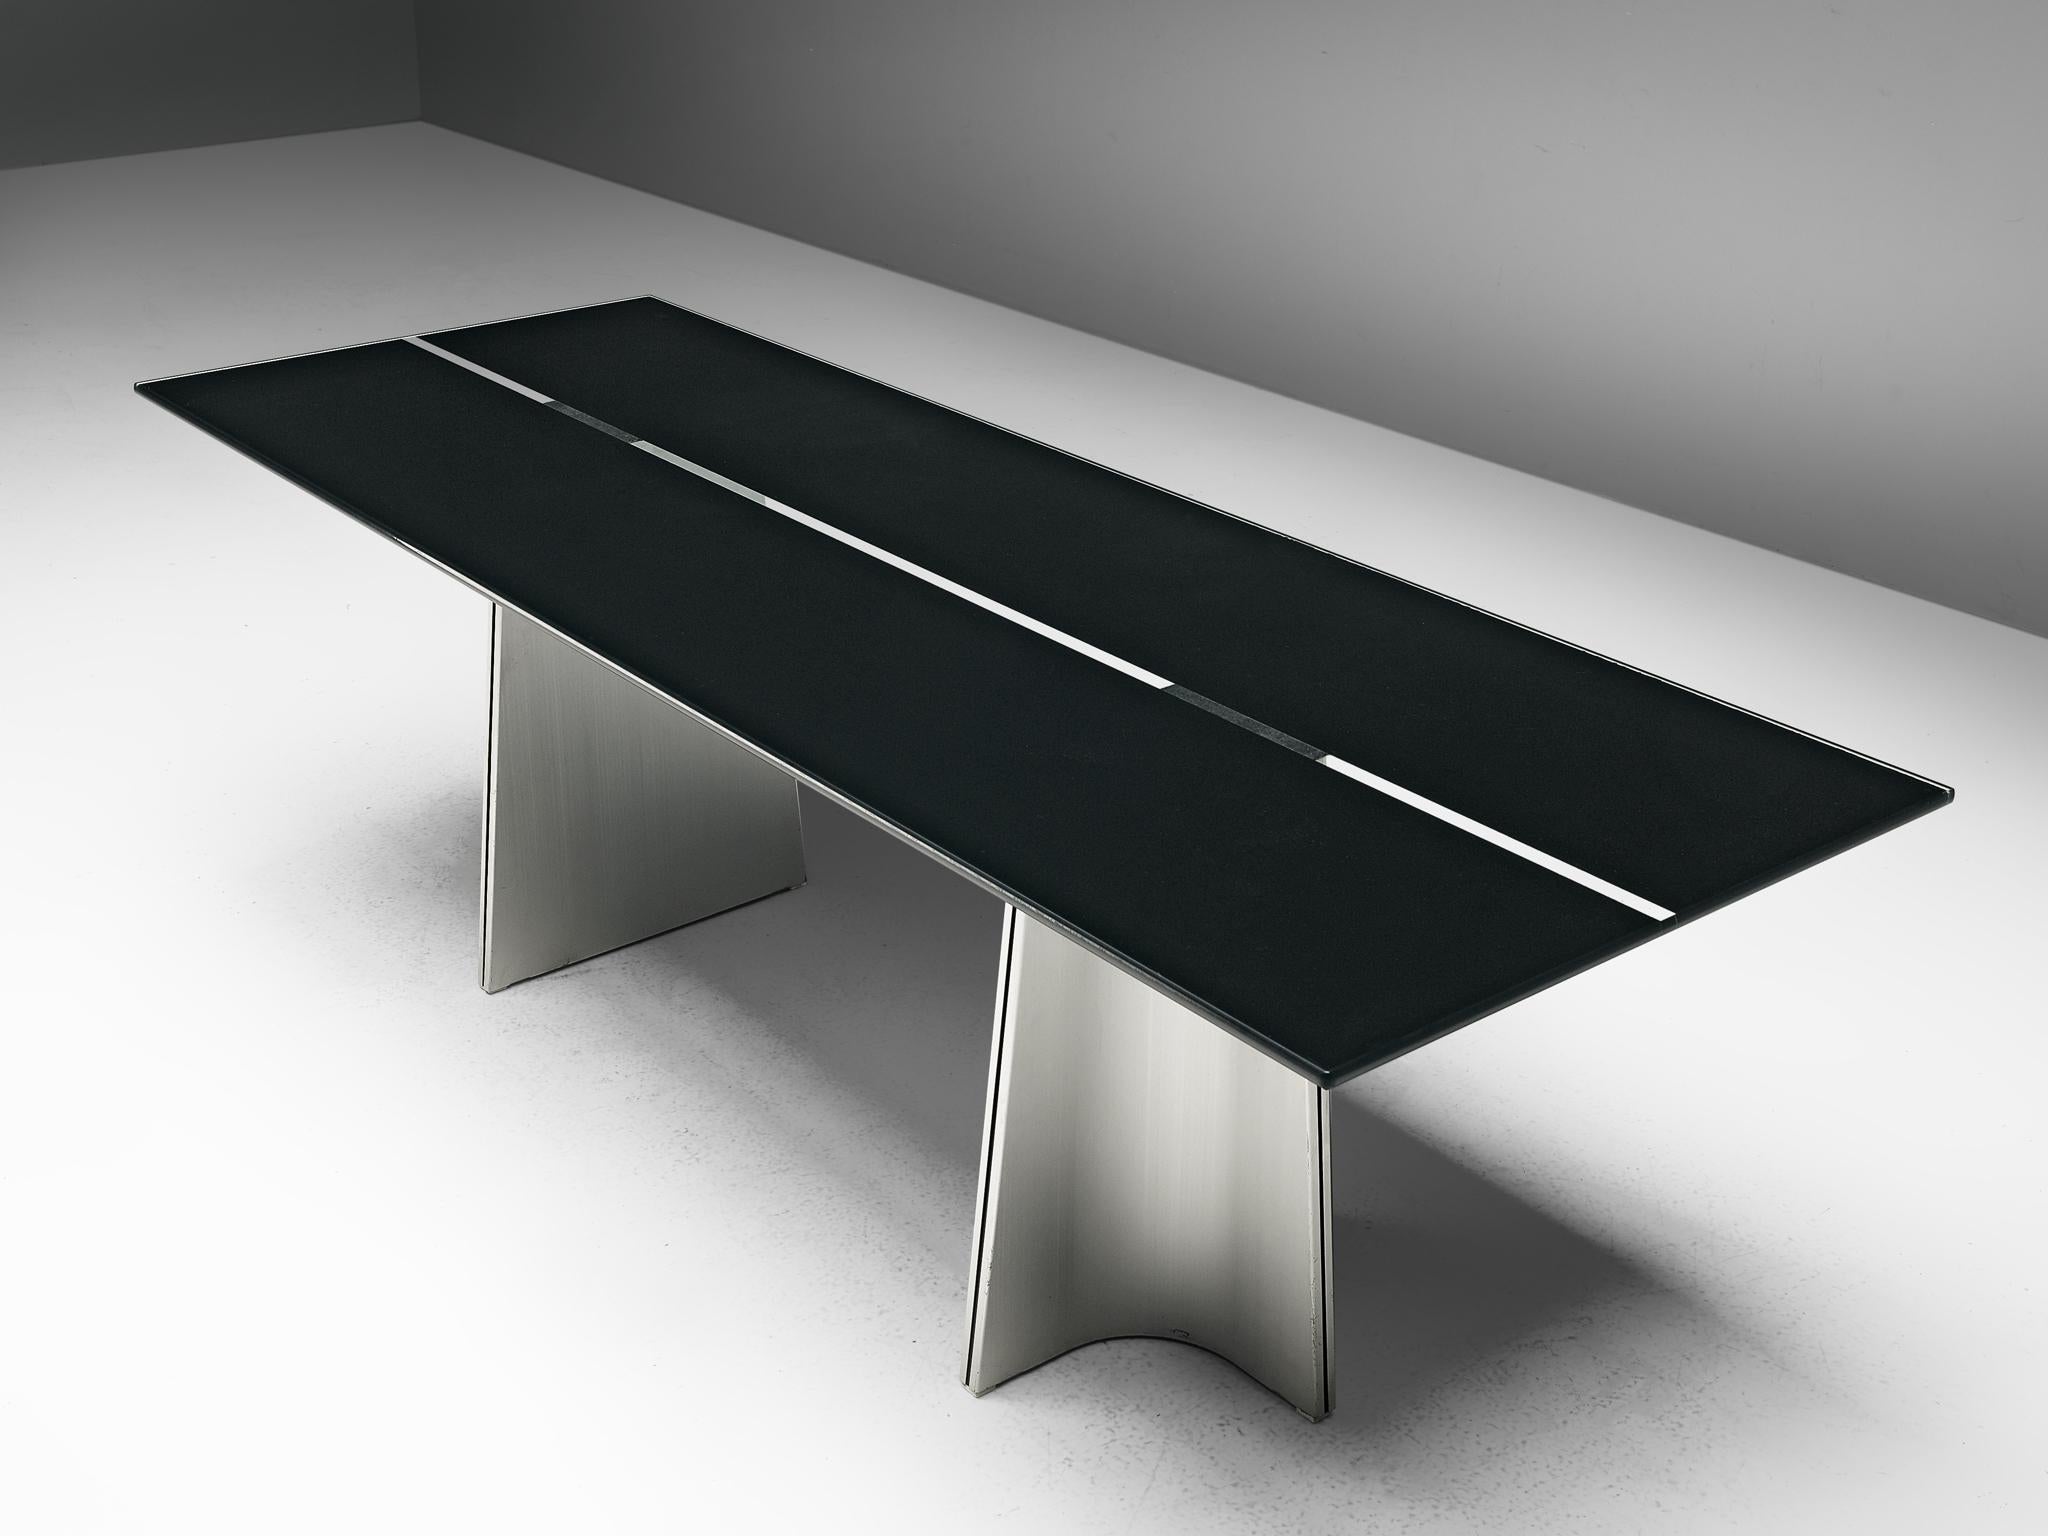 Luigi Saccardo for Arrmet, dining table model 'Ufo', metal and glass, Italy, 1972 

This outstanding dining table is based on a well thought out construction that is aesthetically pleasing. The whole unit is characterized by two sculptural shaped